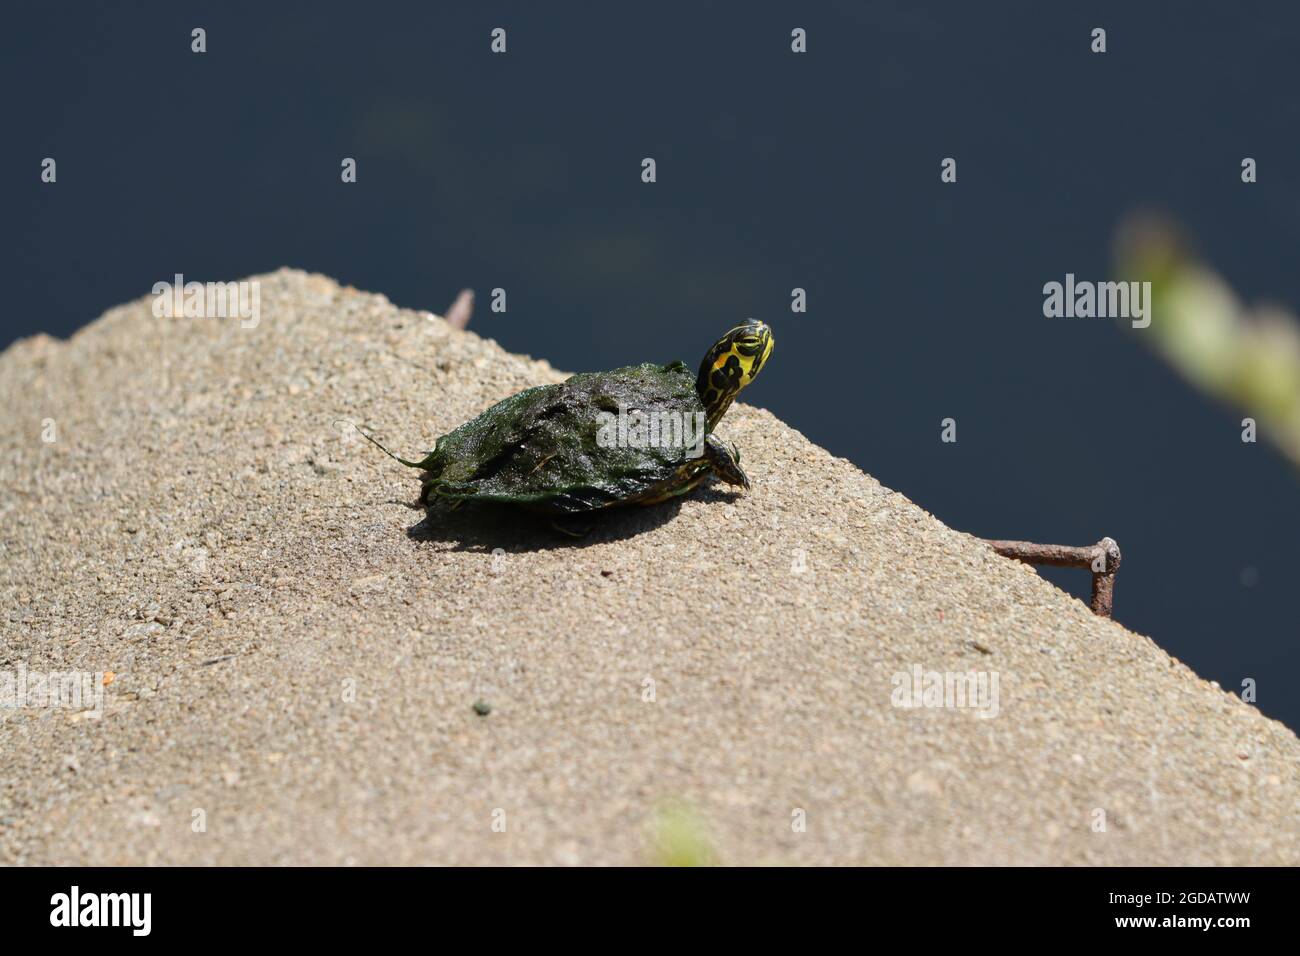 A young Florida redbelly turtle with algae on its shell Stock Photo